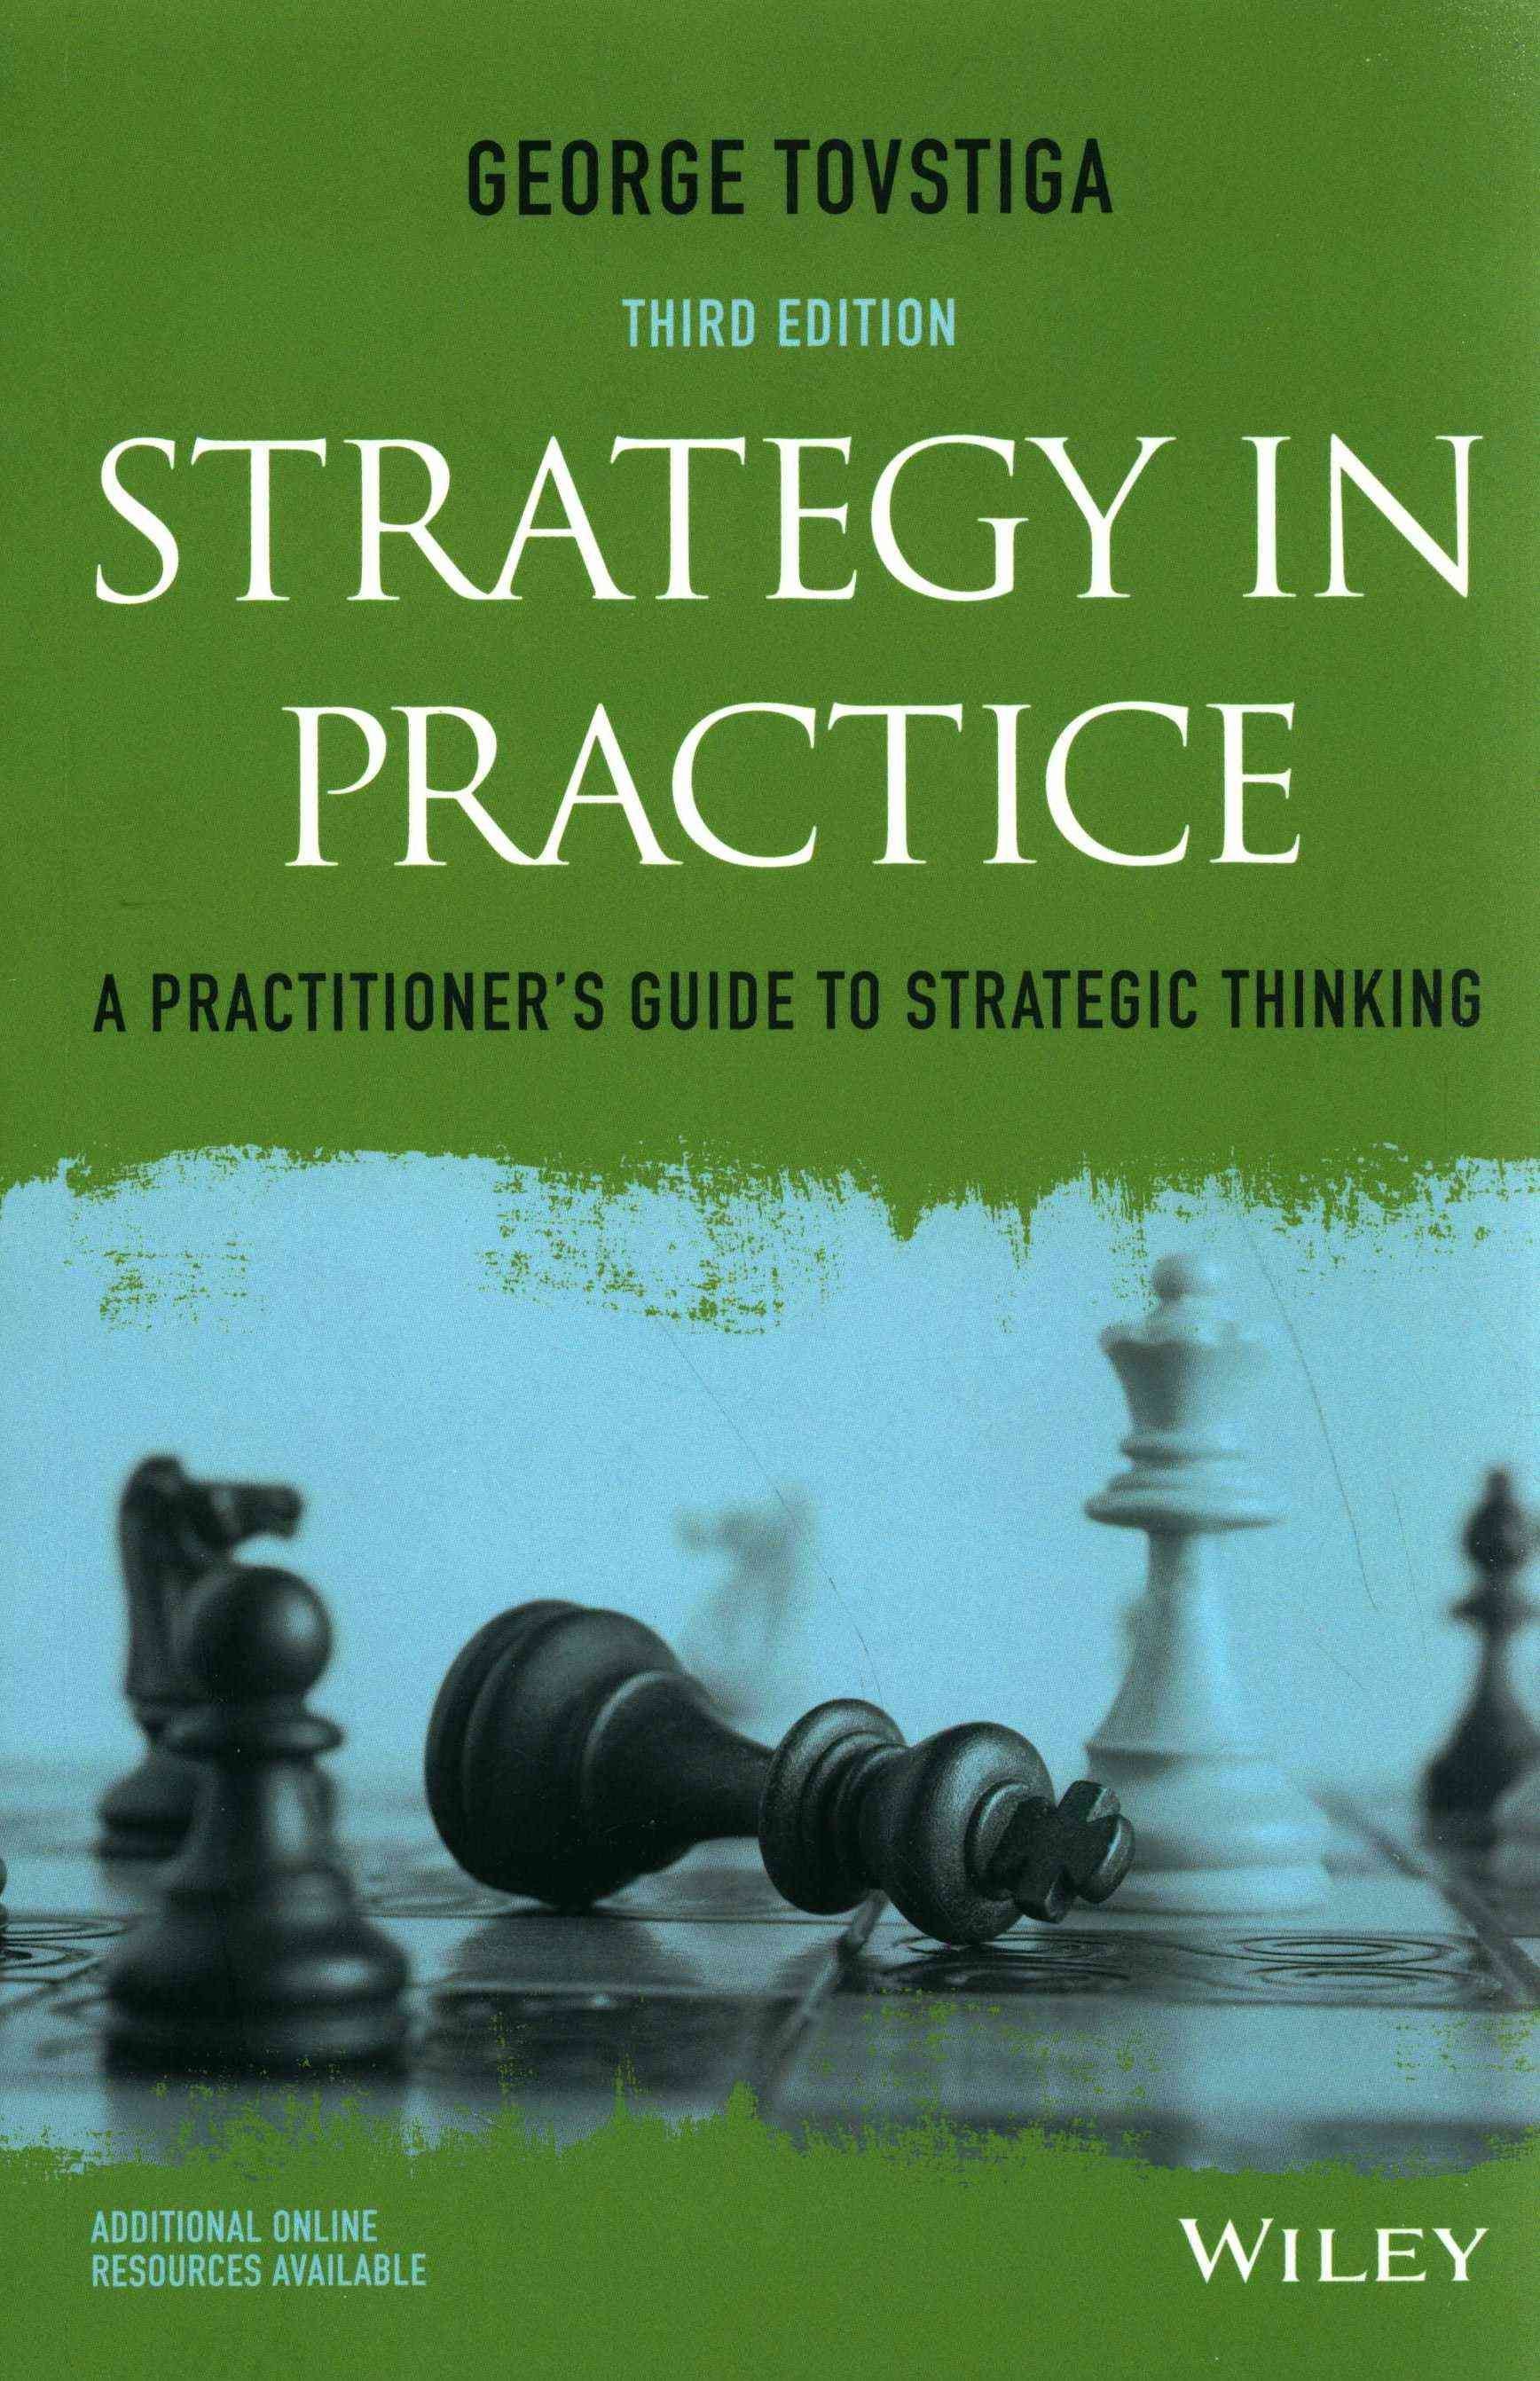 Strategy in Practice - A Practitioner's Guide to Strategic Thinking 3e